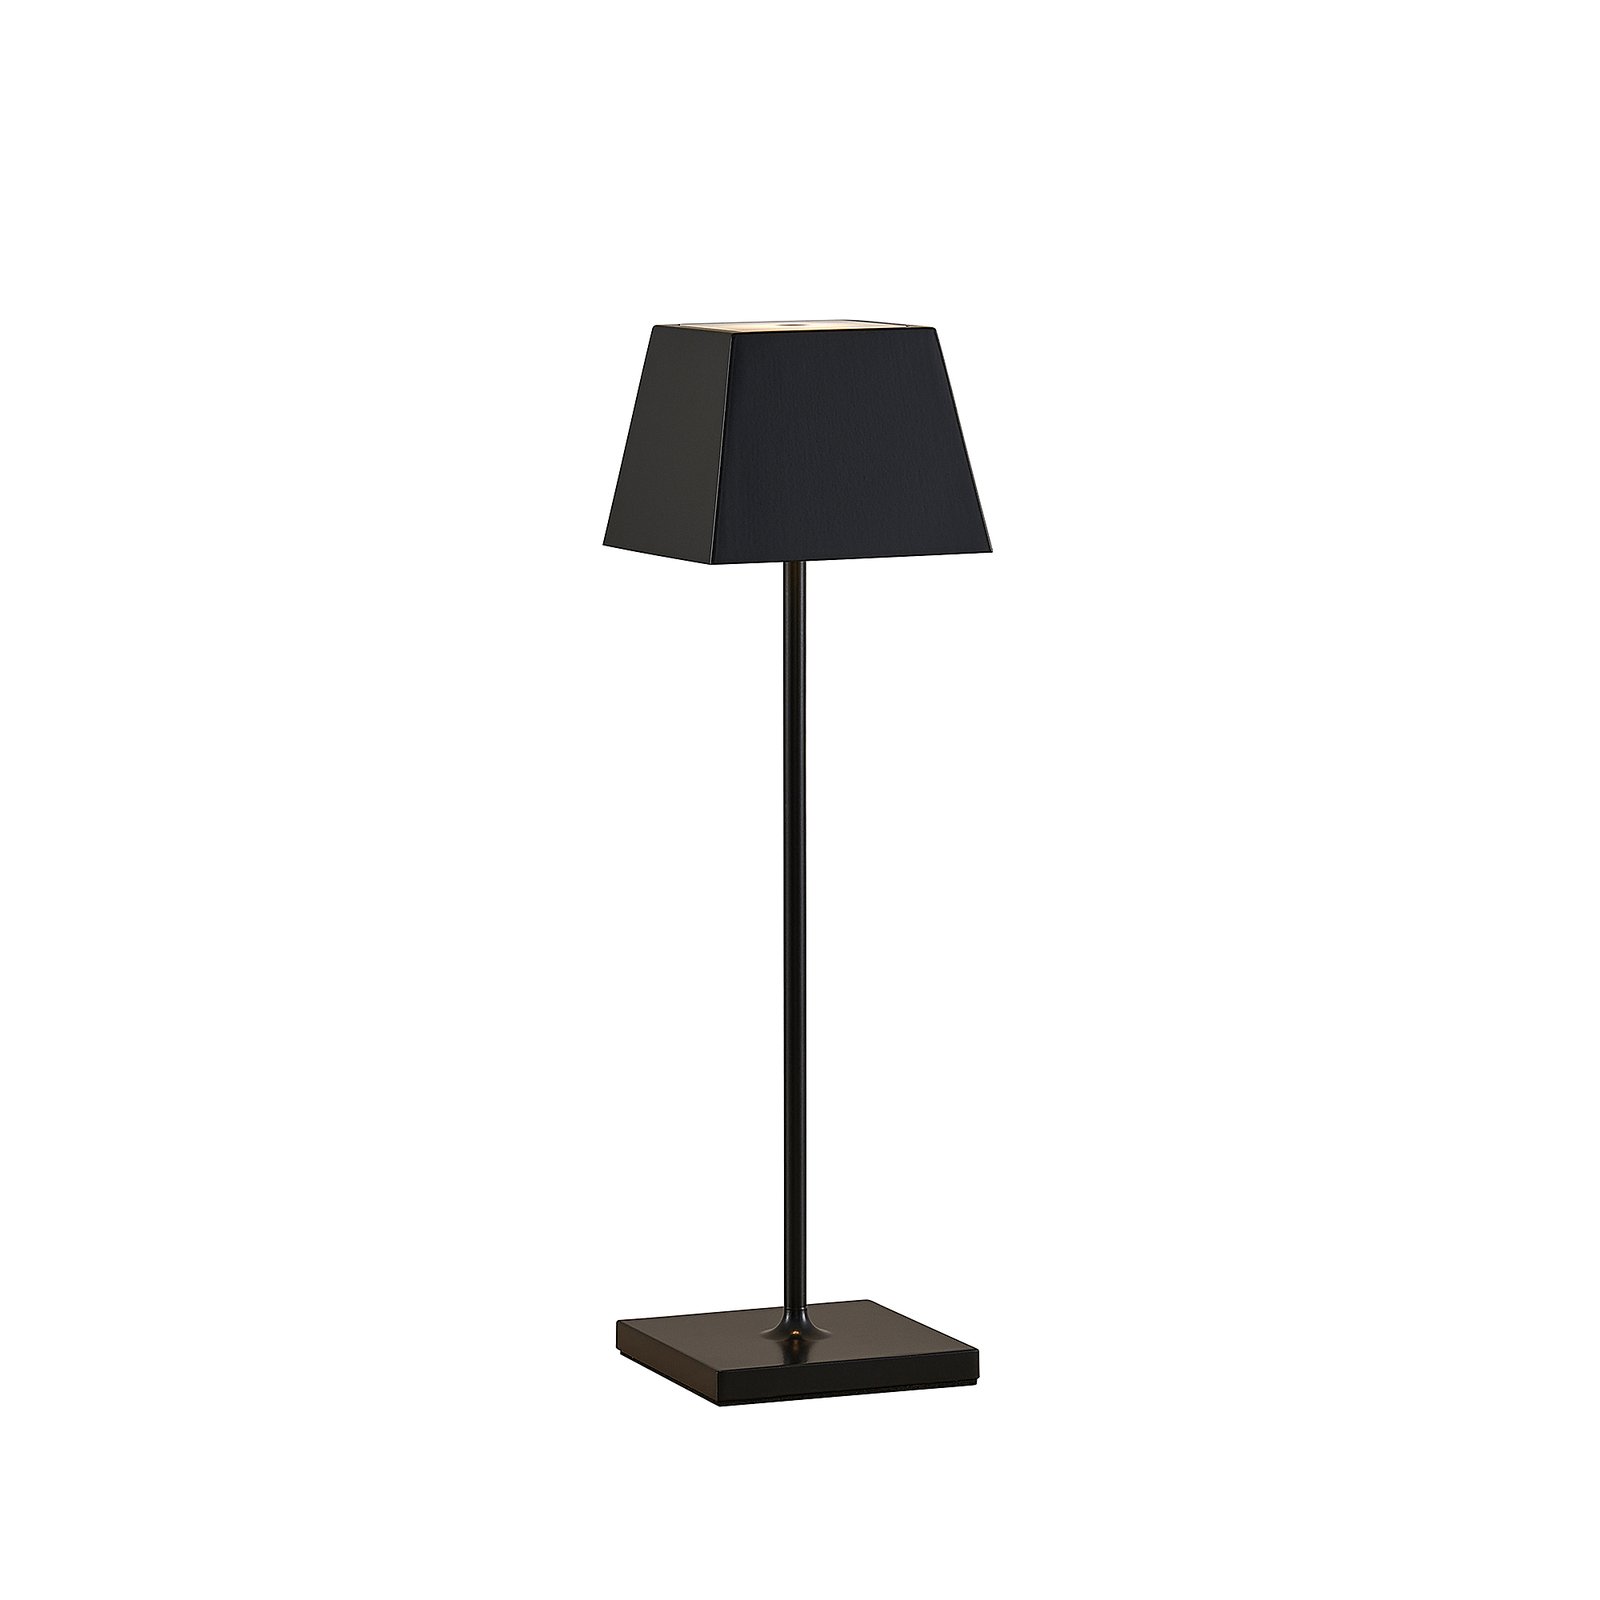 Lucande Patini LED table lamp for outdoors, black